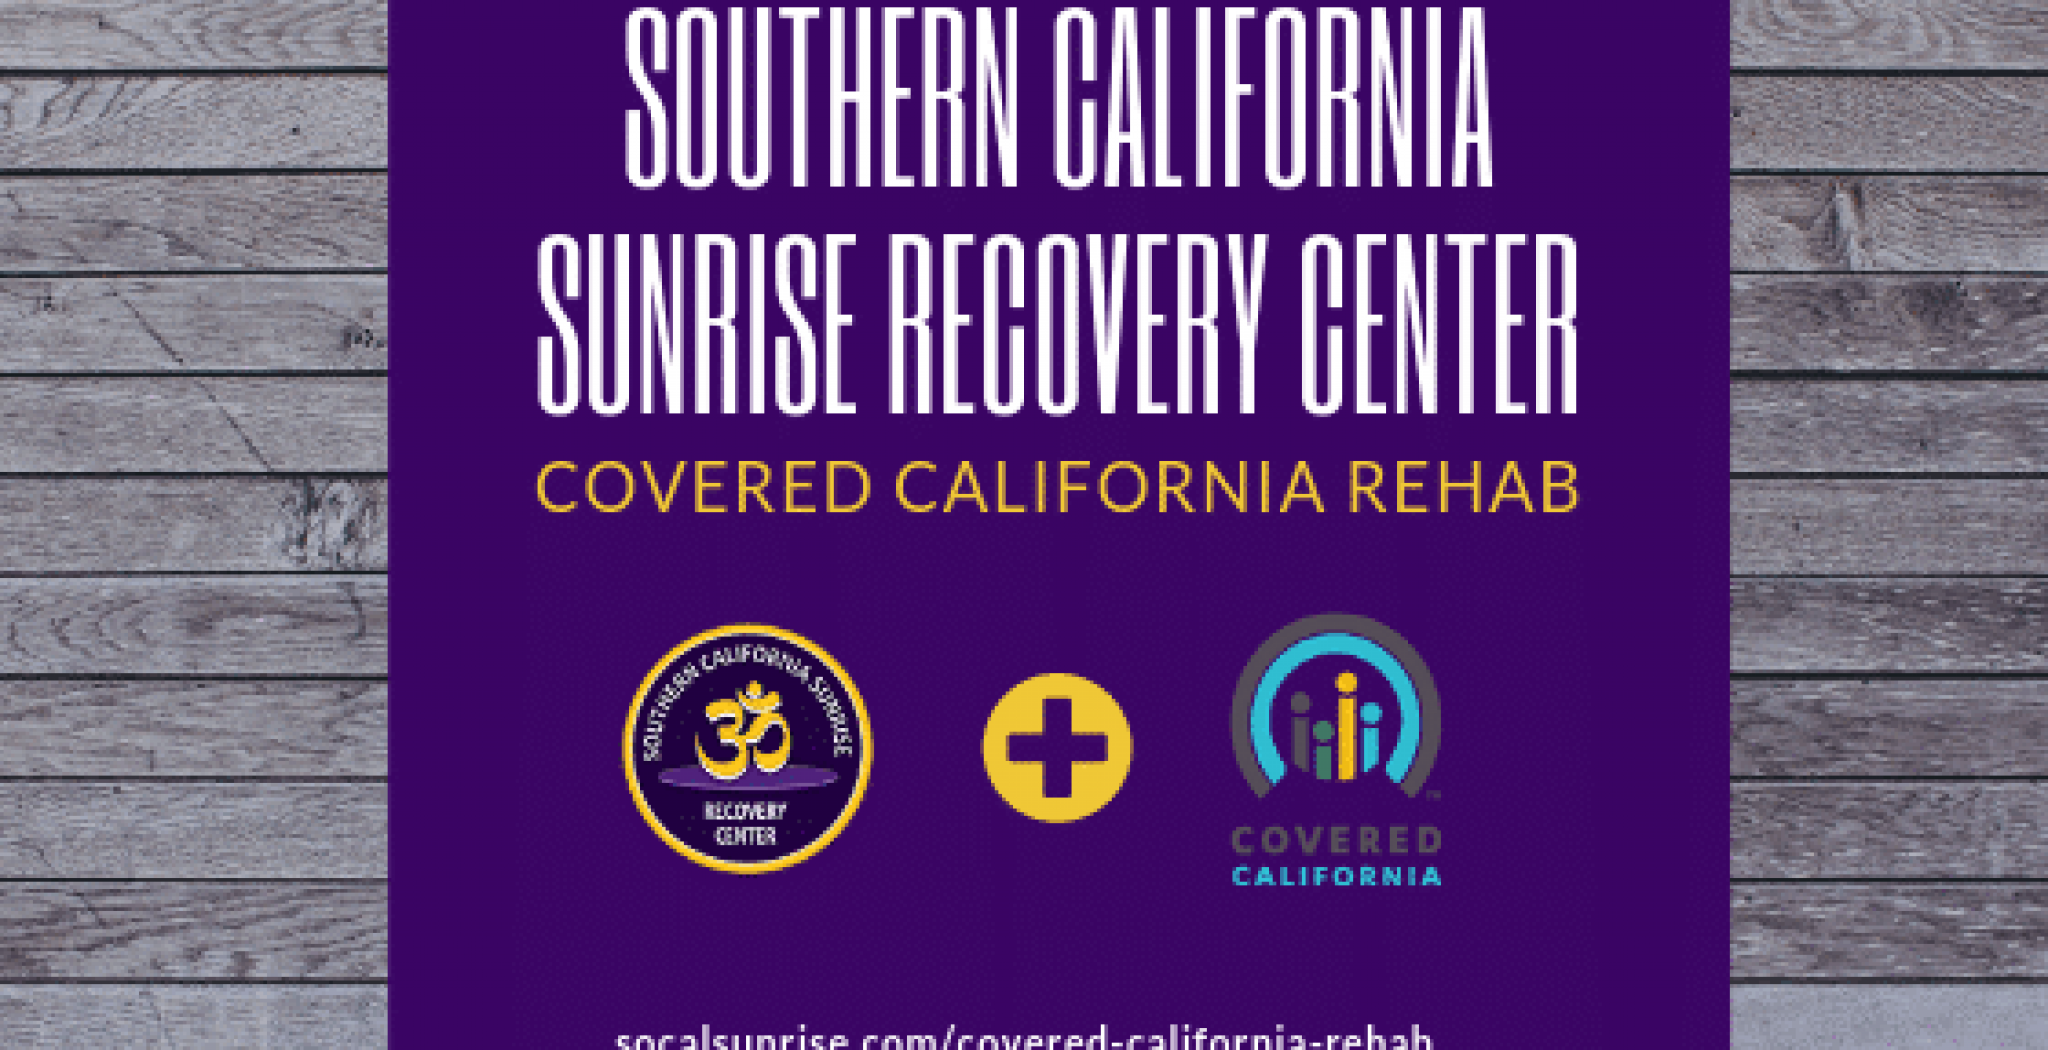 SOUTHERN-CALIFORNIA-SUNRISE-RECOVERY-CENTER-2